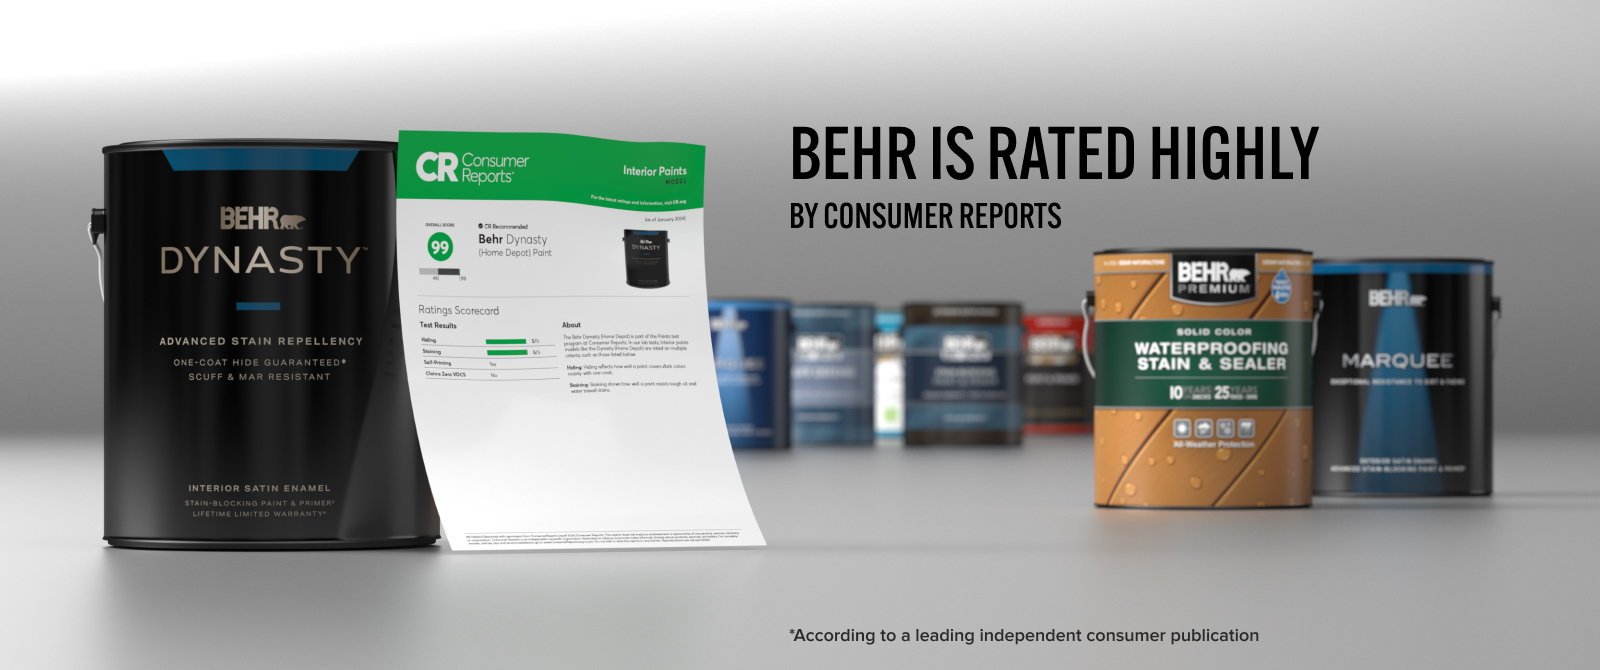 BEHR is Rated Highly by Consumer Reports